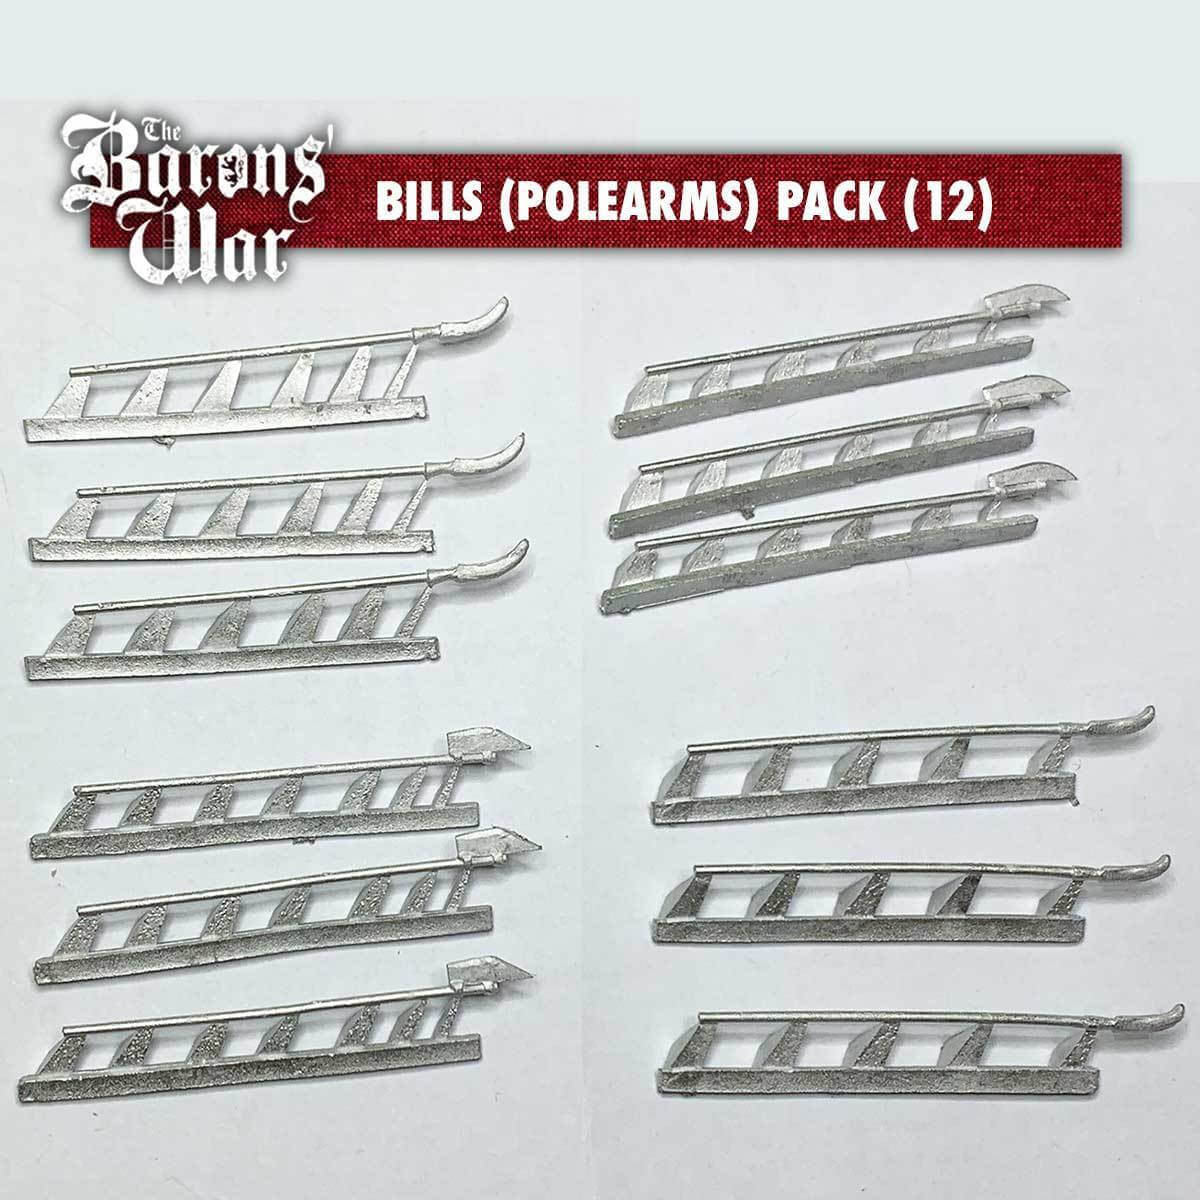 Bills (polearms) pack (12) Footsore